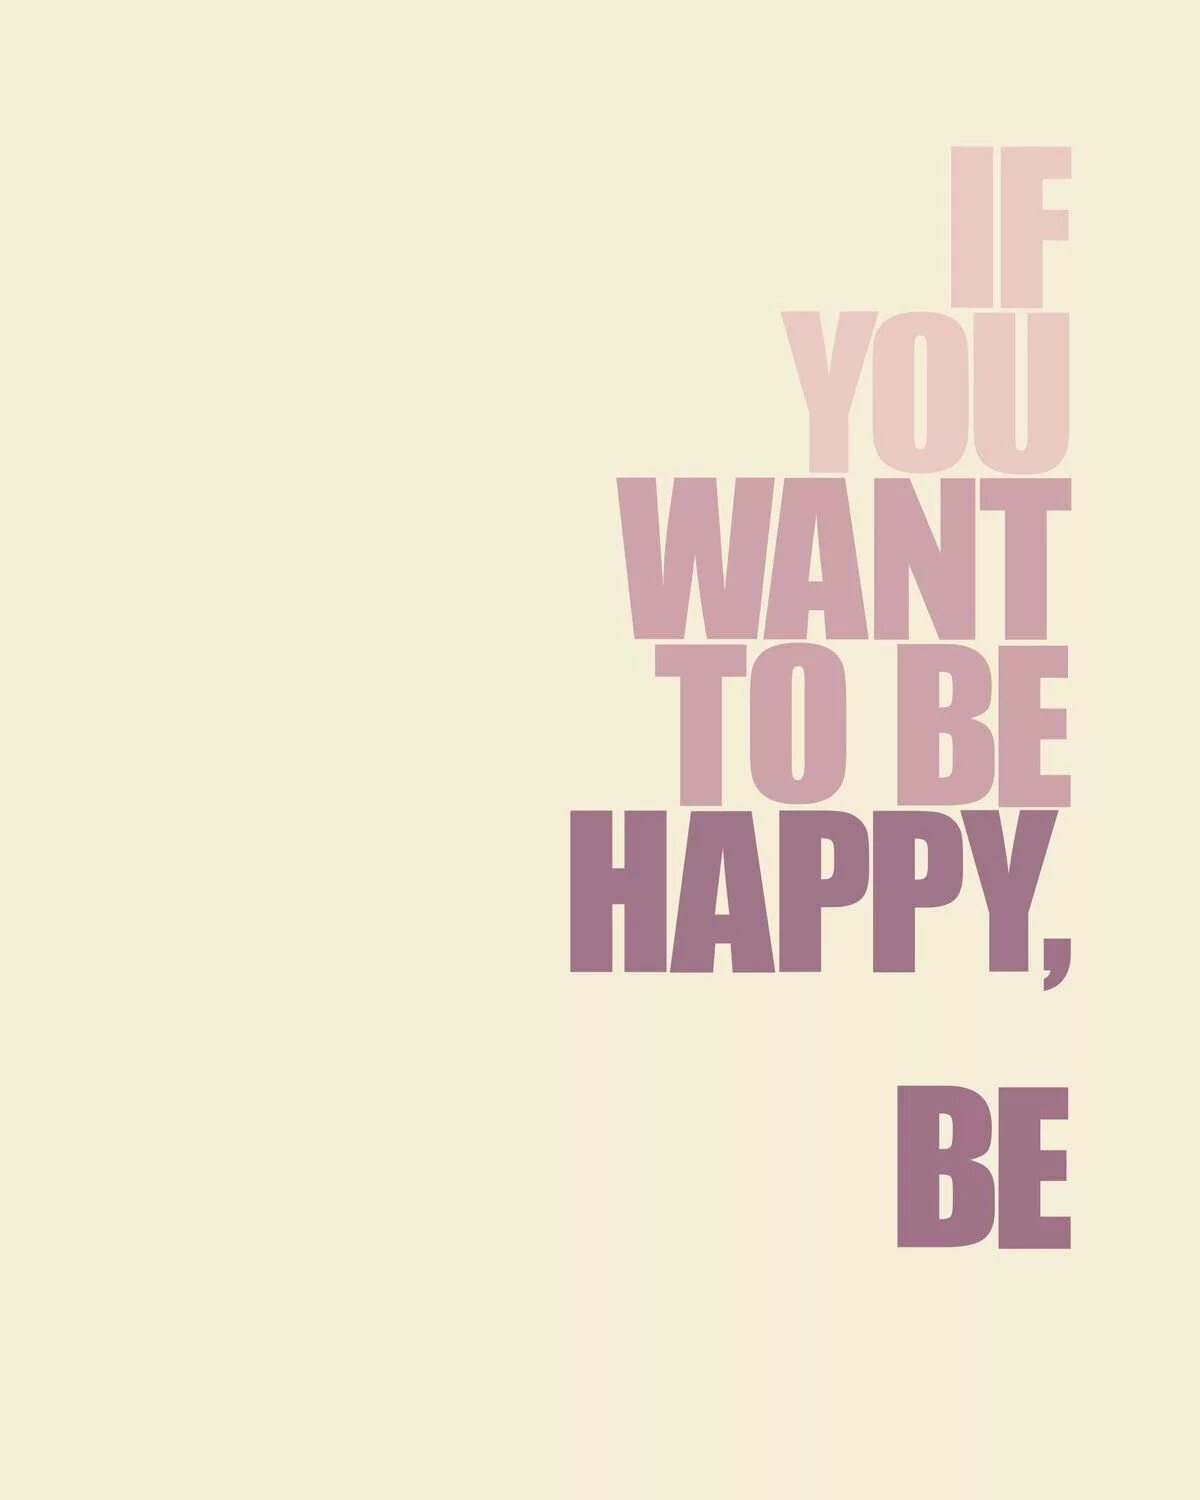 If you want to be Happy be. Be Happy. Цитаты be Happy be. I want to be Happy картинки. Be happy com